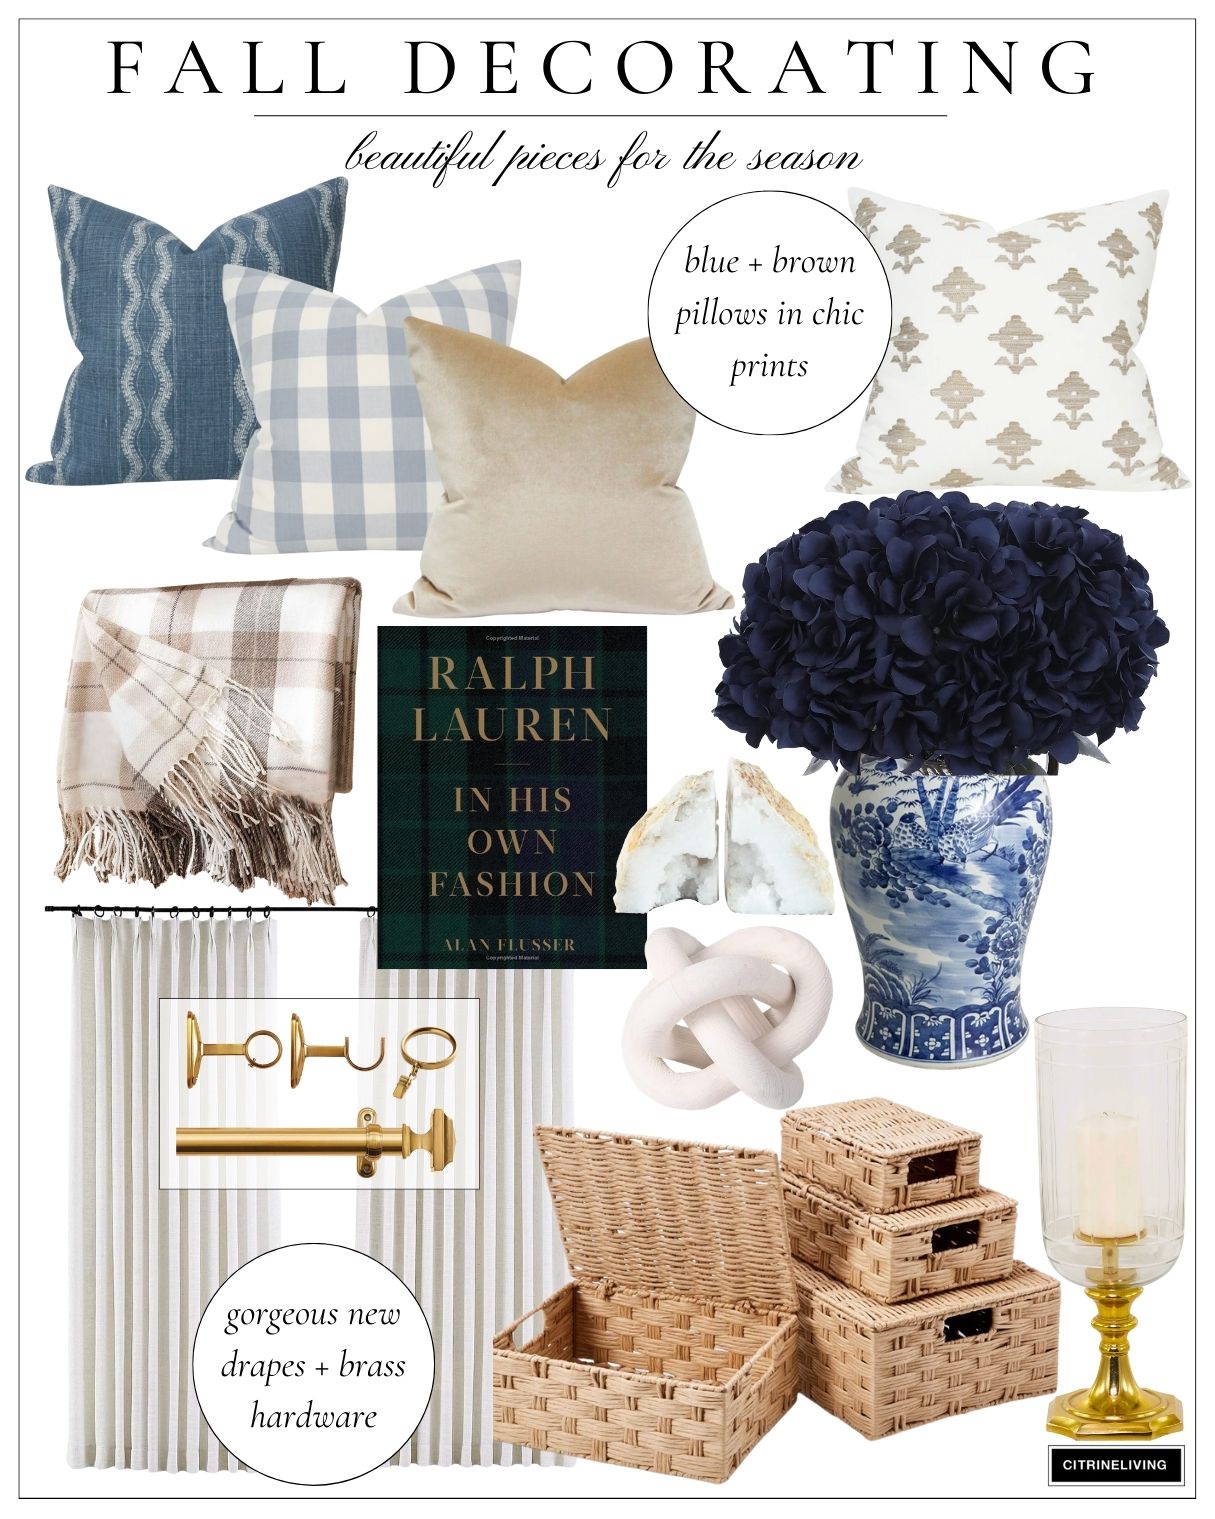 Fall home decor acceesories in shades of blue, brown, ivory, and gold